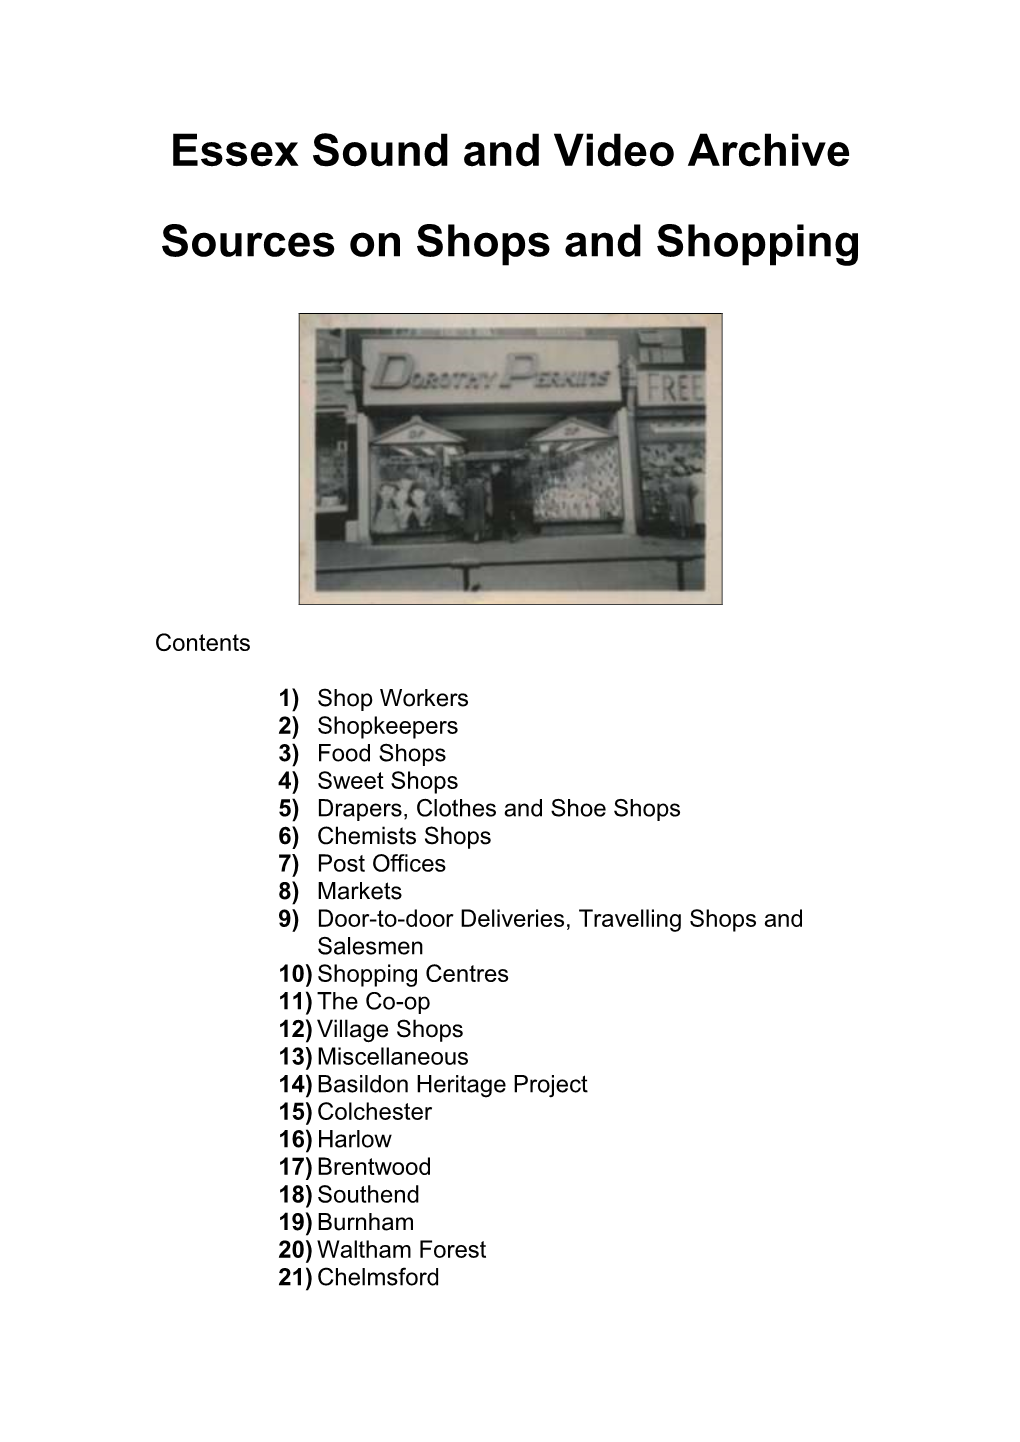 Essex Sound and Video Archive Sources on Shops and Shopping